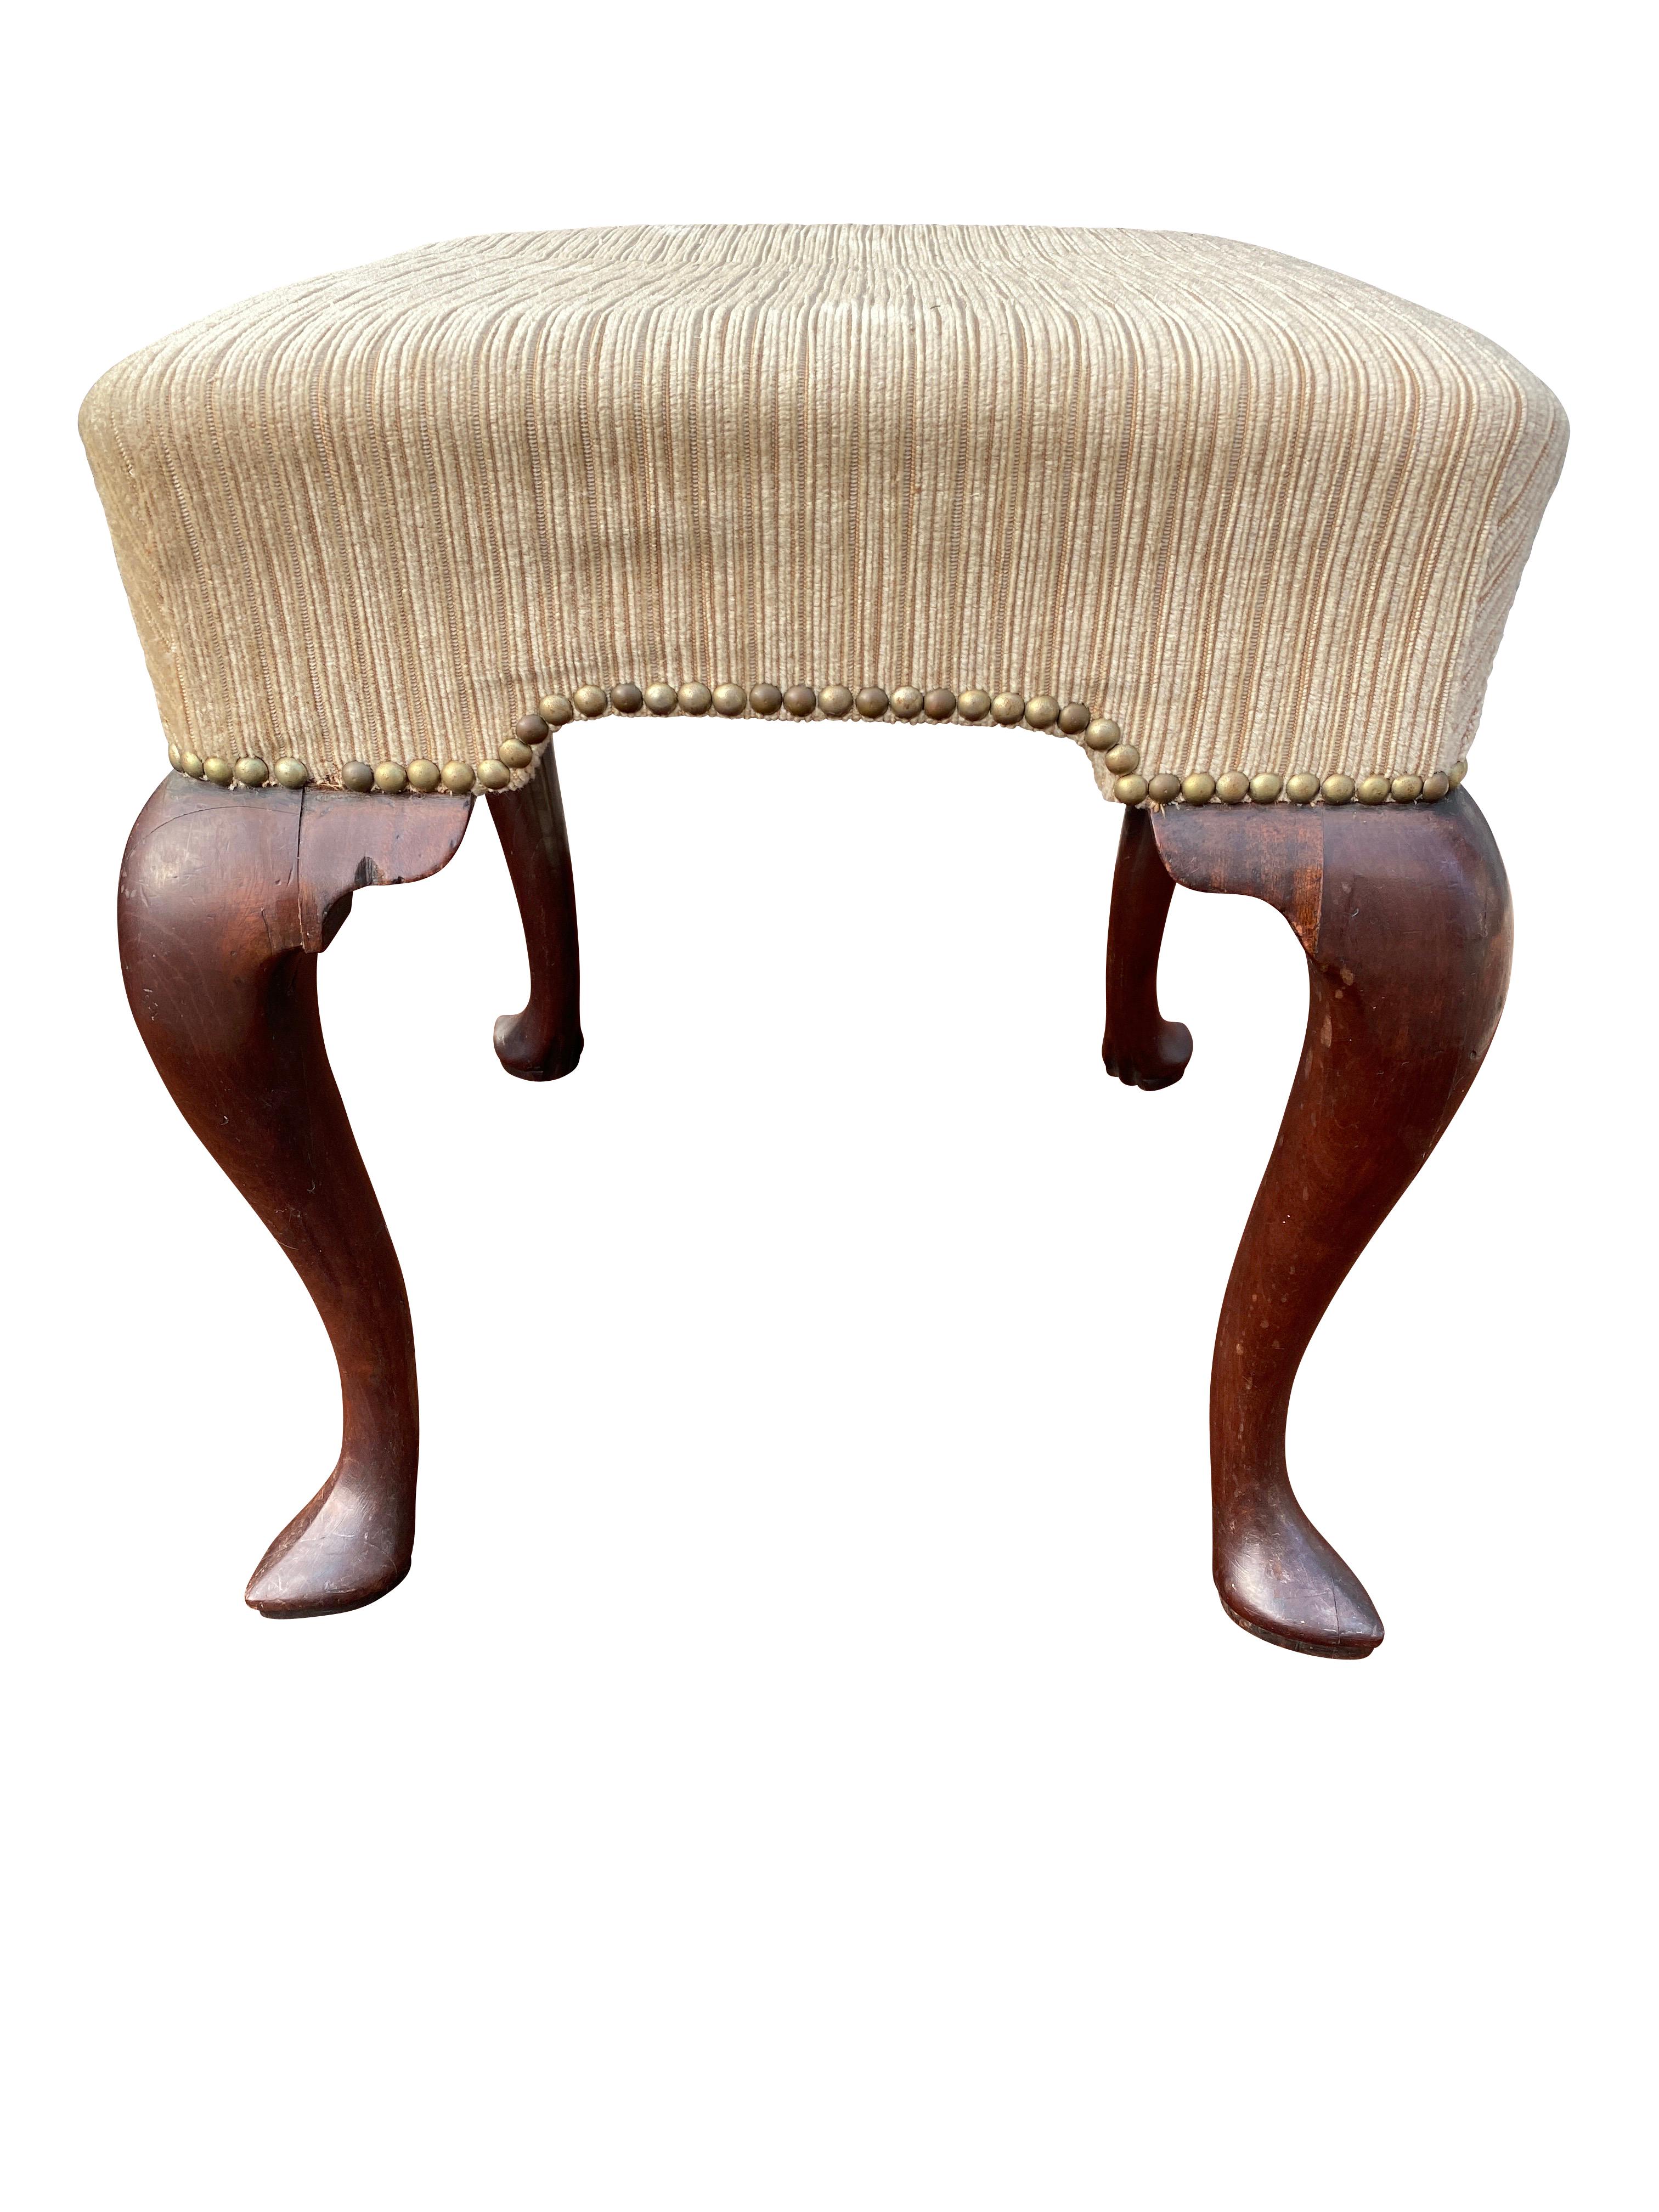 Square beige mohair seat raised on cabriole legs with pointed pad feet.